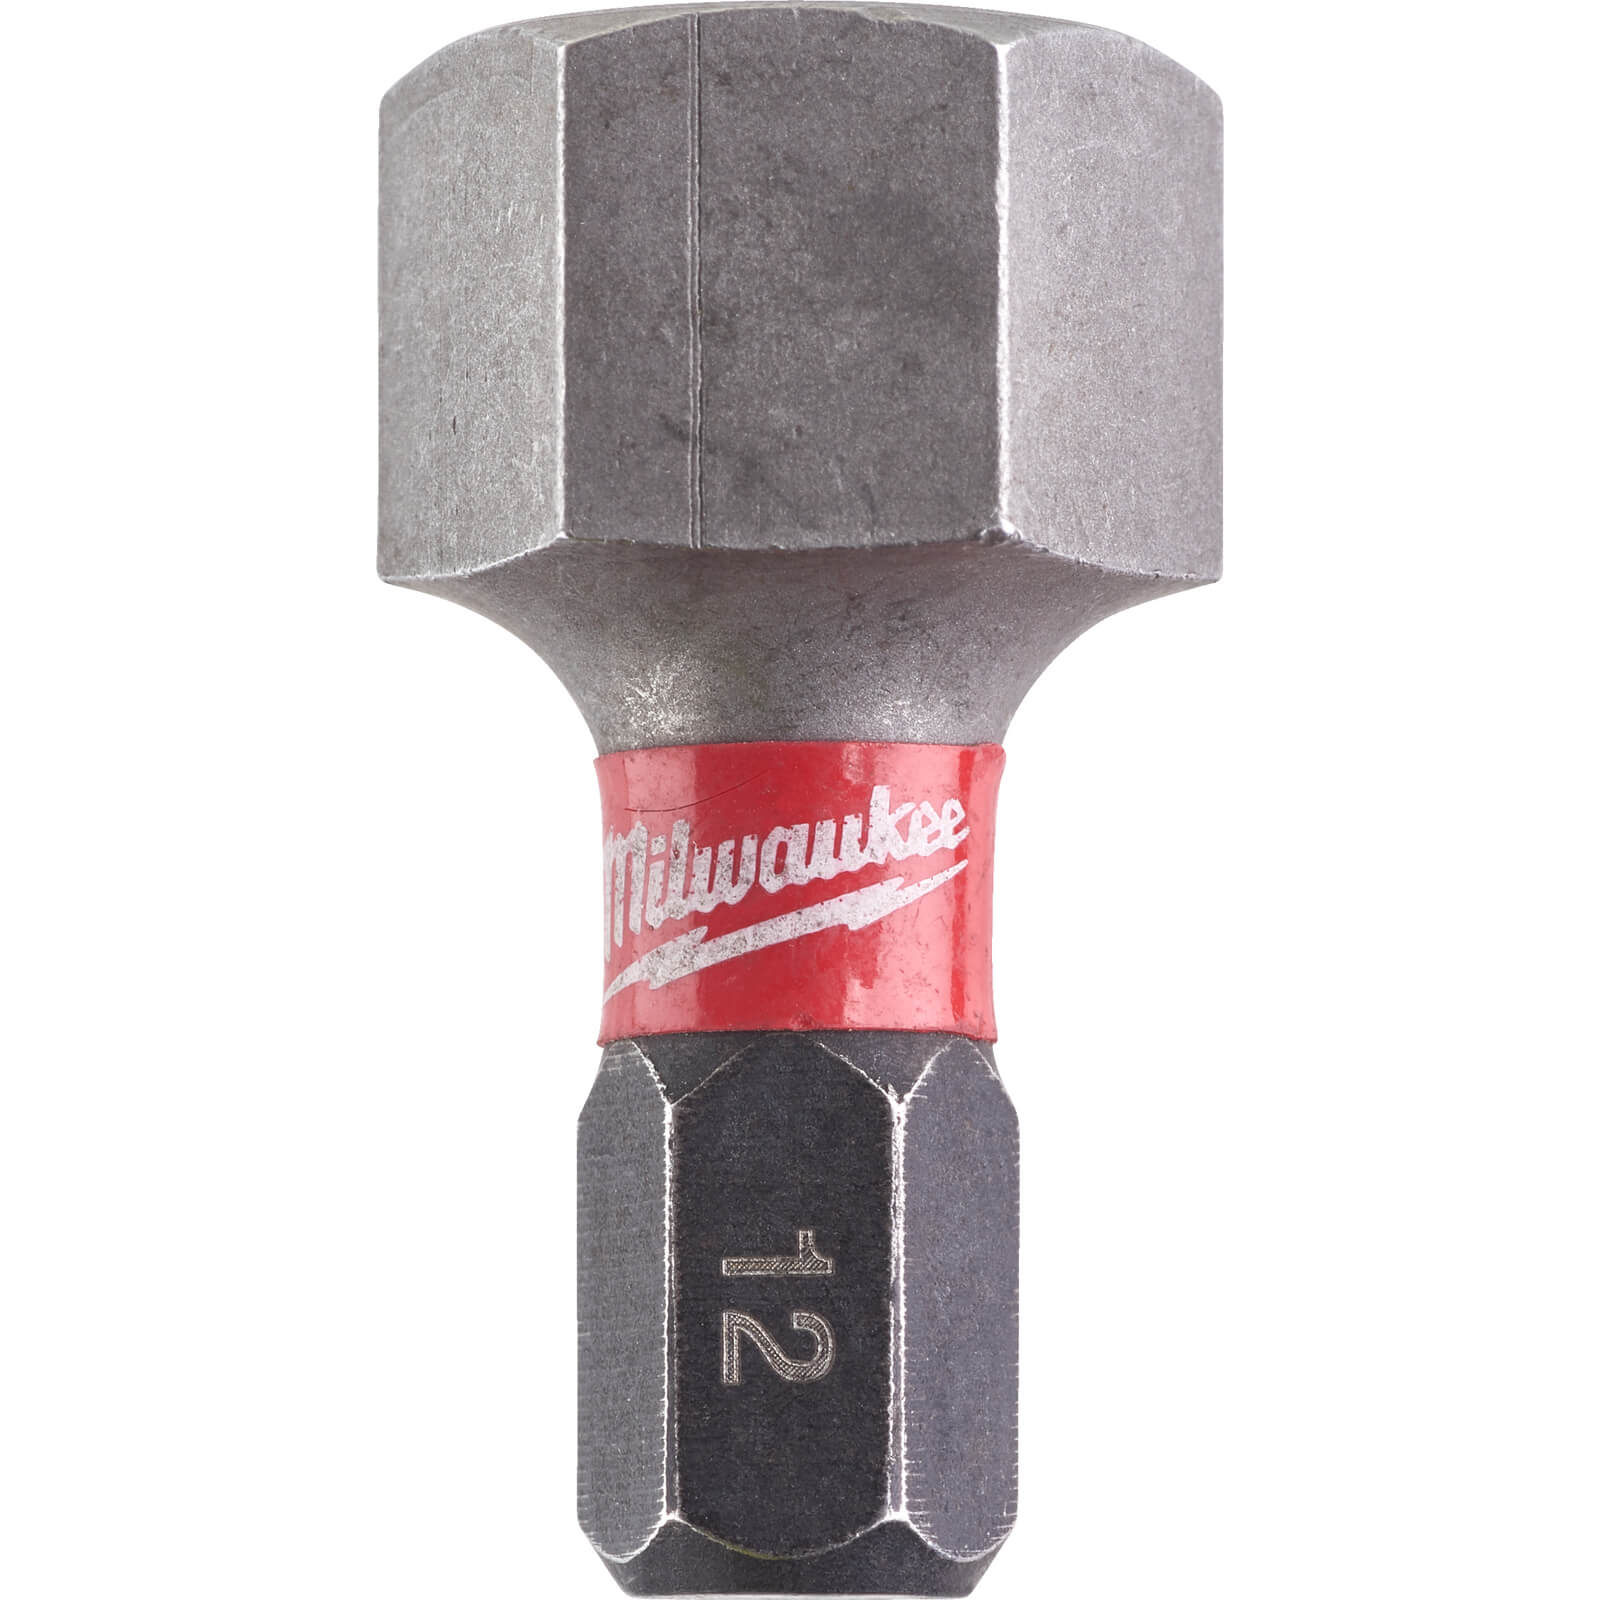 Photos - Bits / Sockets Milwaukee Shockwave Impact Duty Hex Screwdriver Bits Hex 12mm 25mm Pack of 